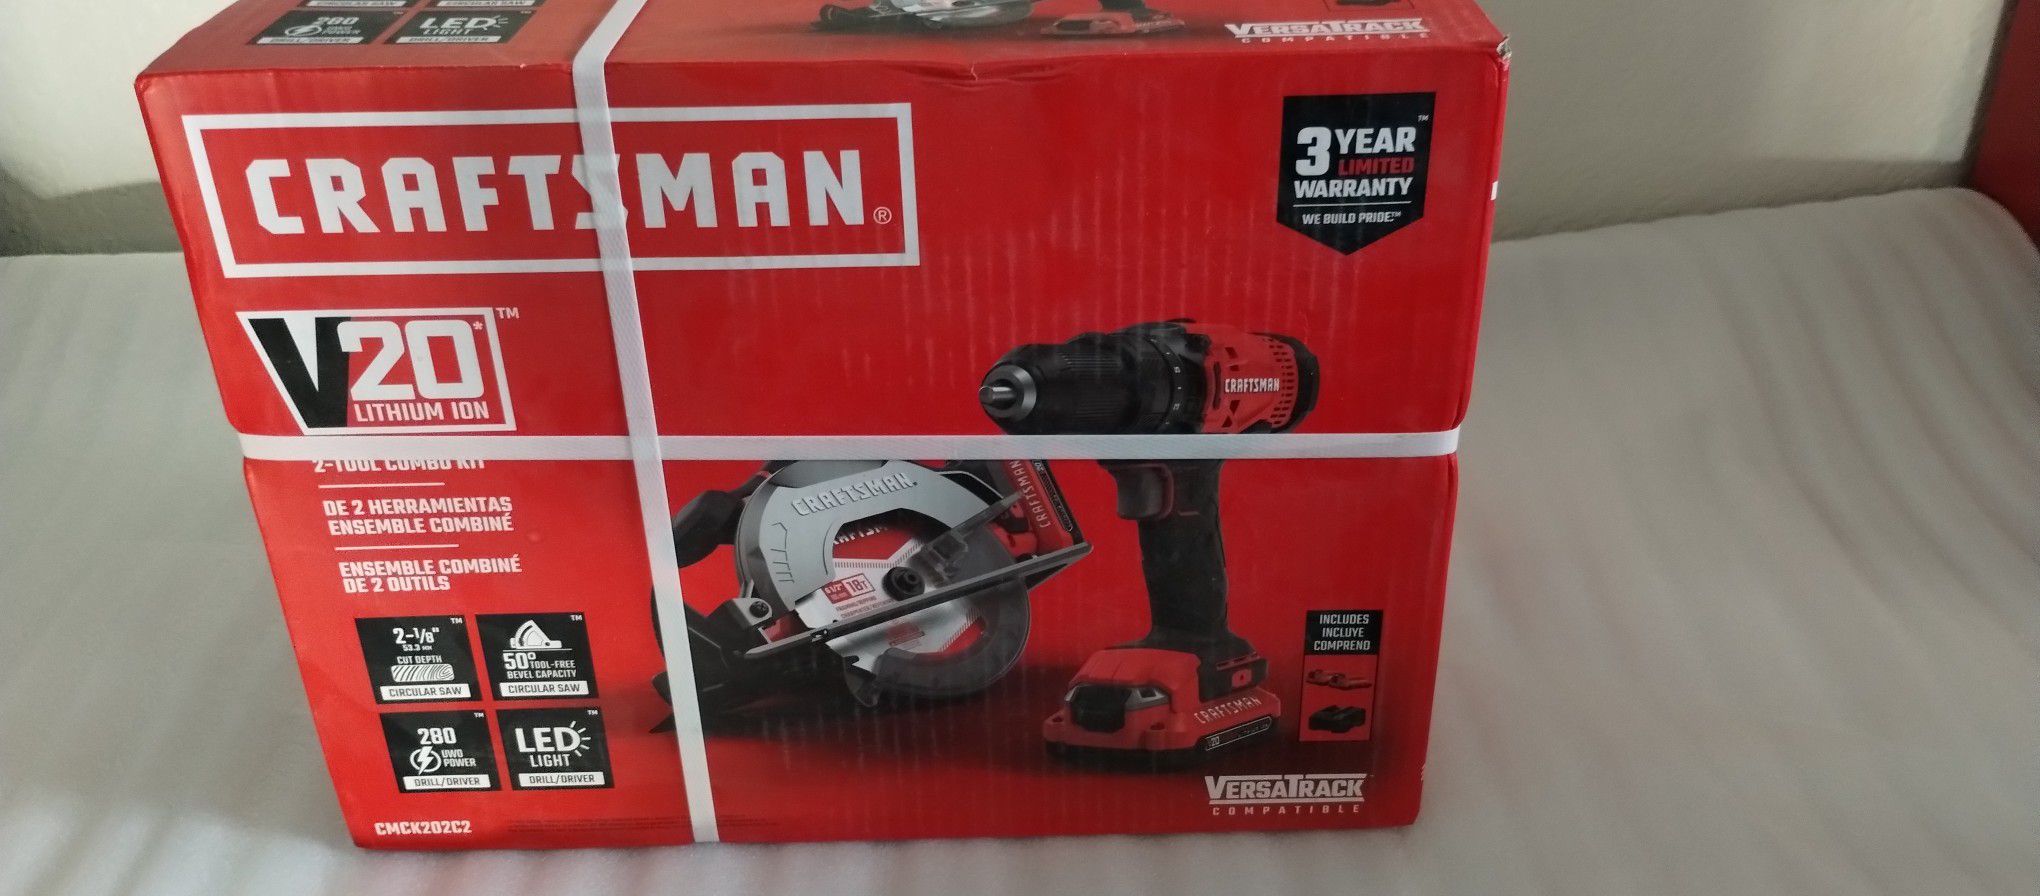 CRAFTSMAN V20 2-Tool Power Tool Combo Kit (2-Batteries Included and Charger Included)